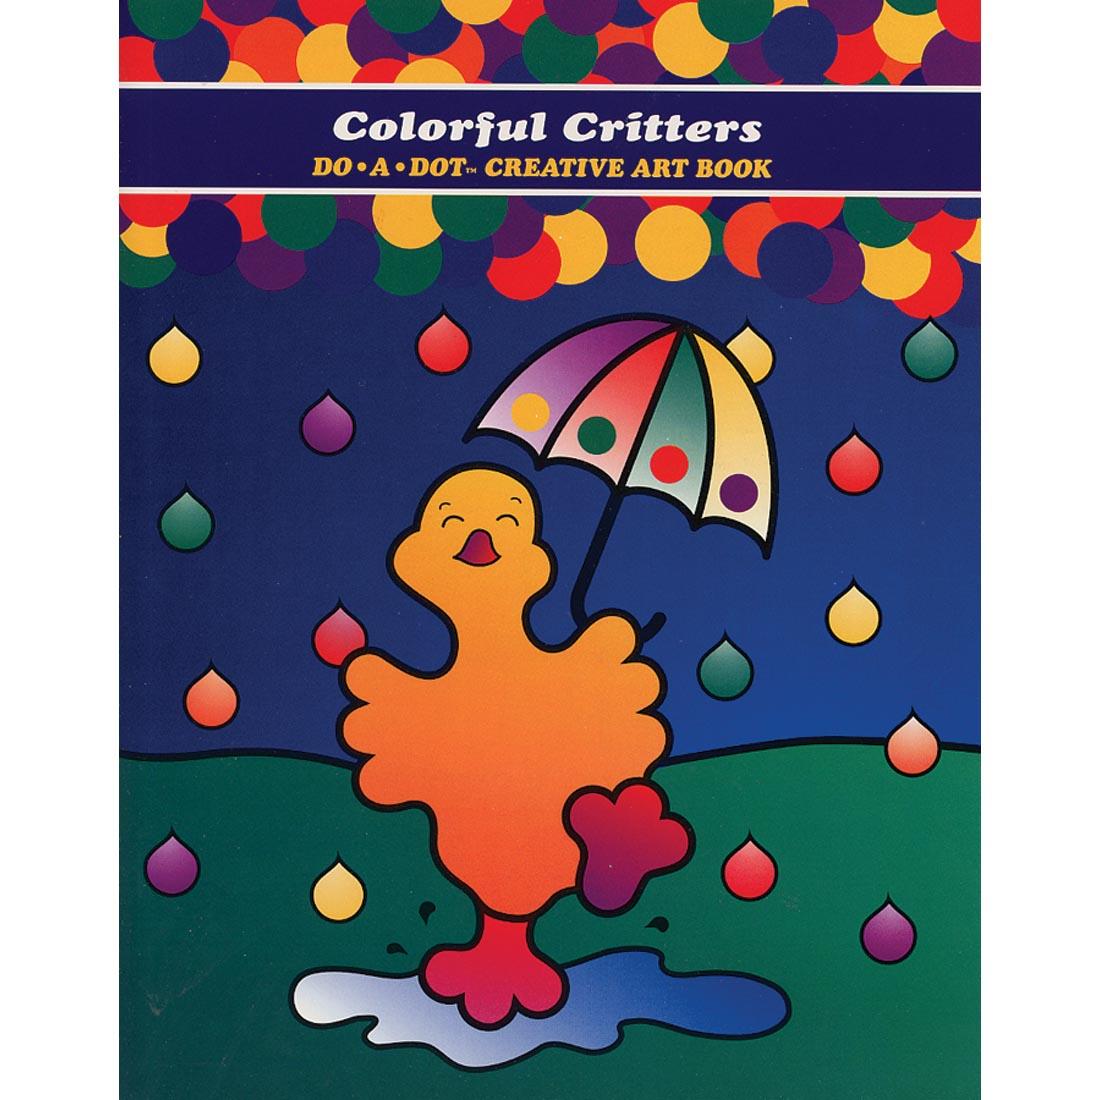 Colorful Critters Do-A-Dot Art! Creative Activity Book